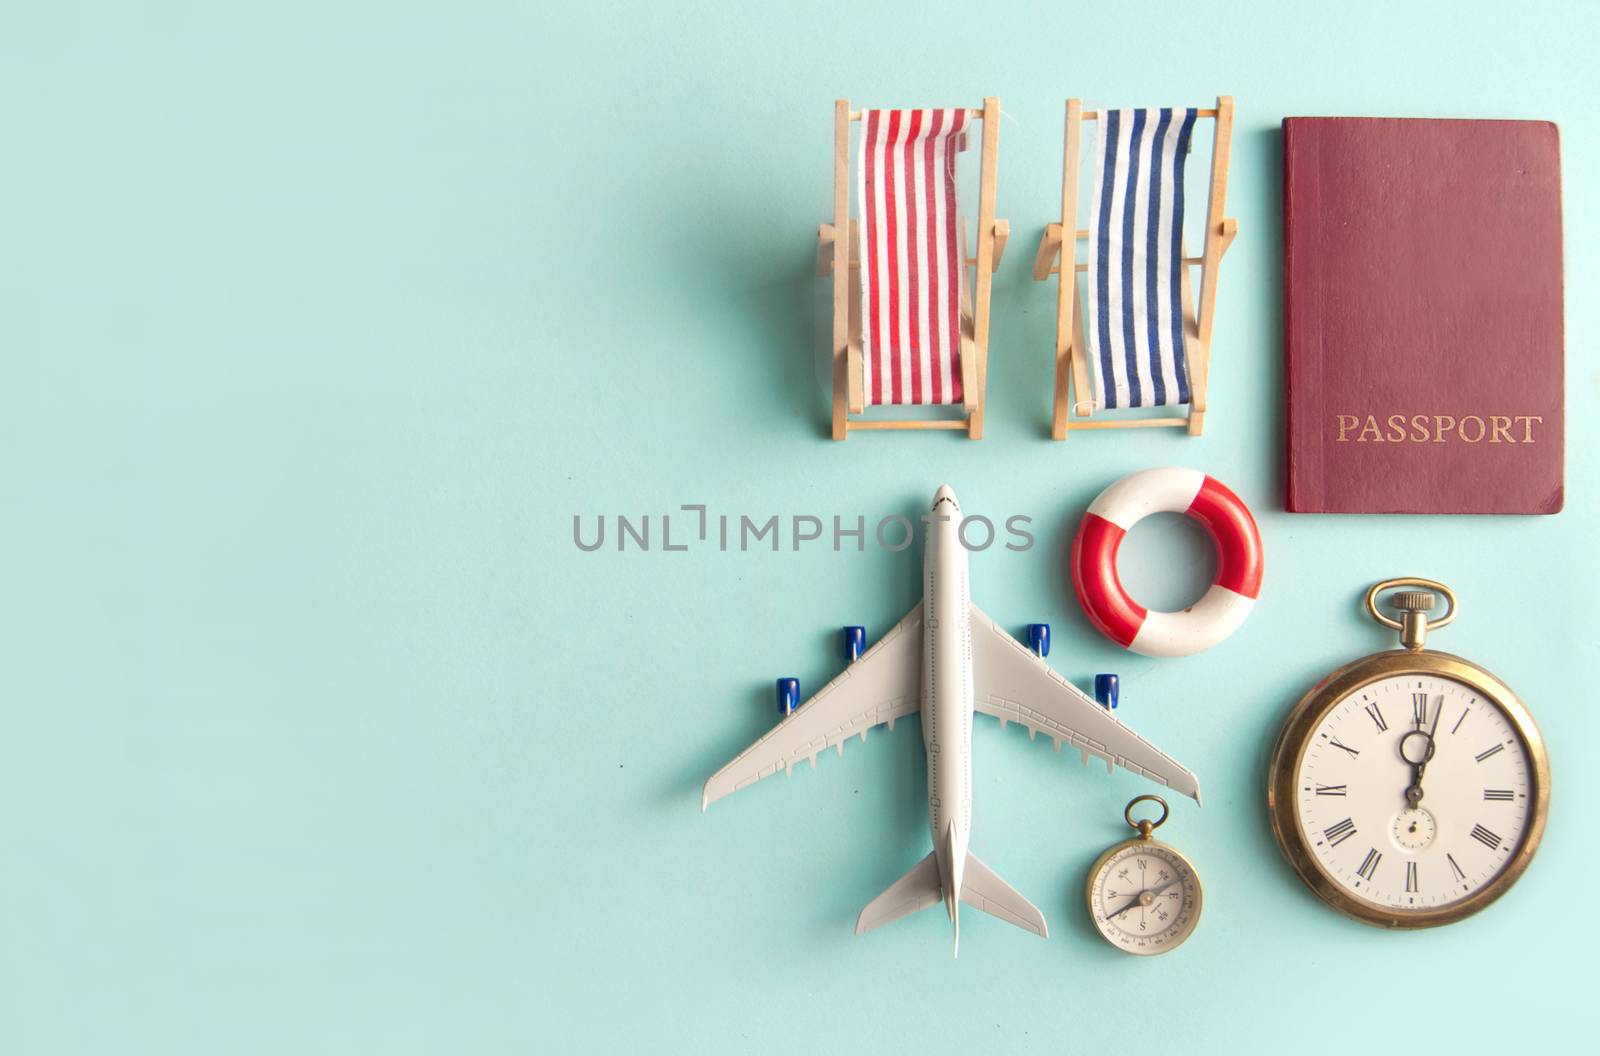 Travel assessories including miniature sun deck chair, airplane, clock and passport with space